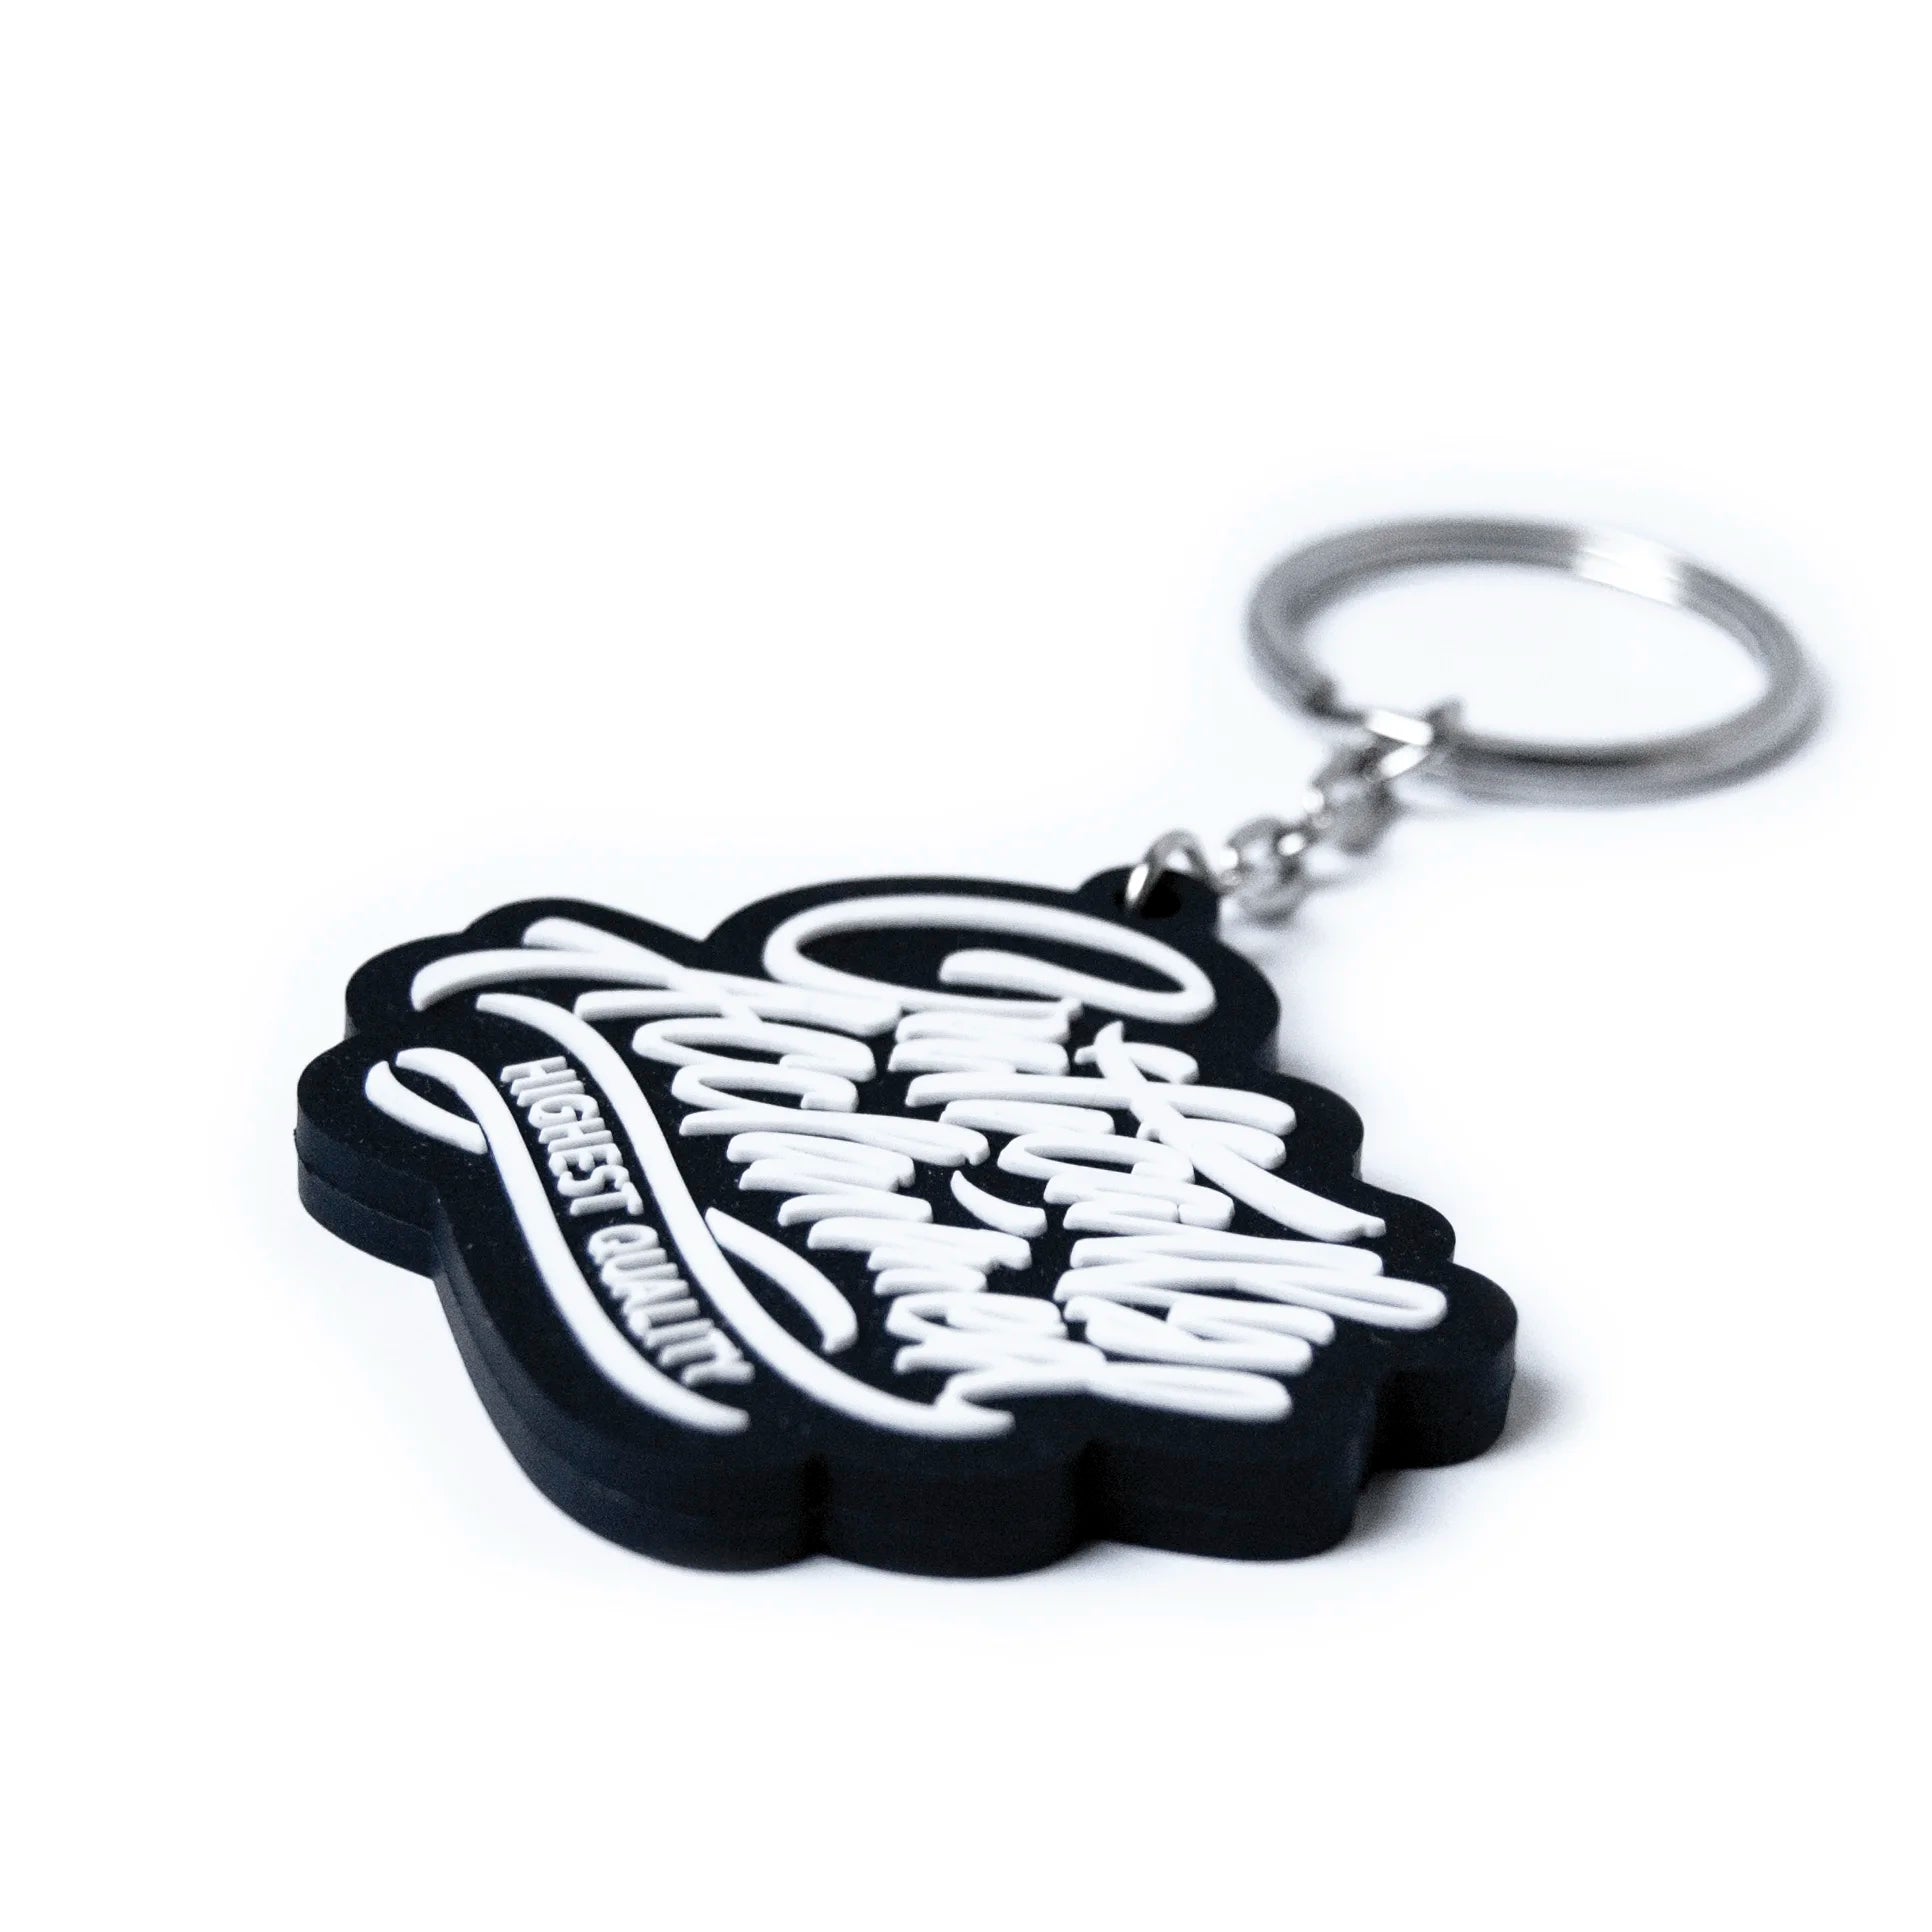 Critically Acclaimed Script Logo Ruber Keyring Close-Up